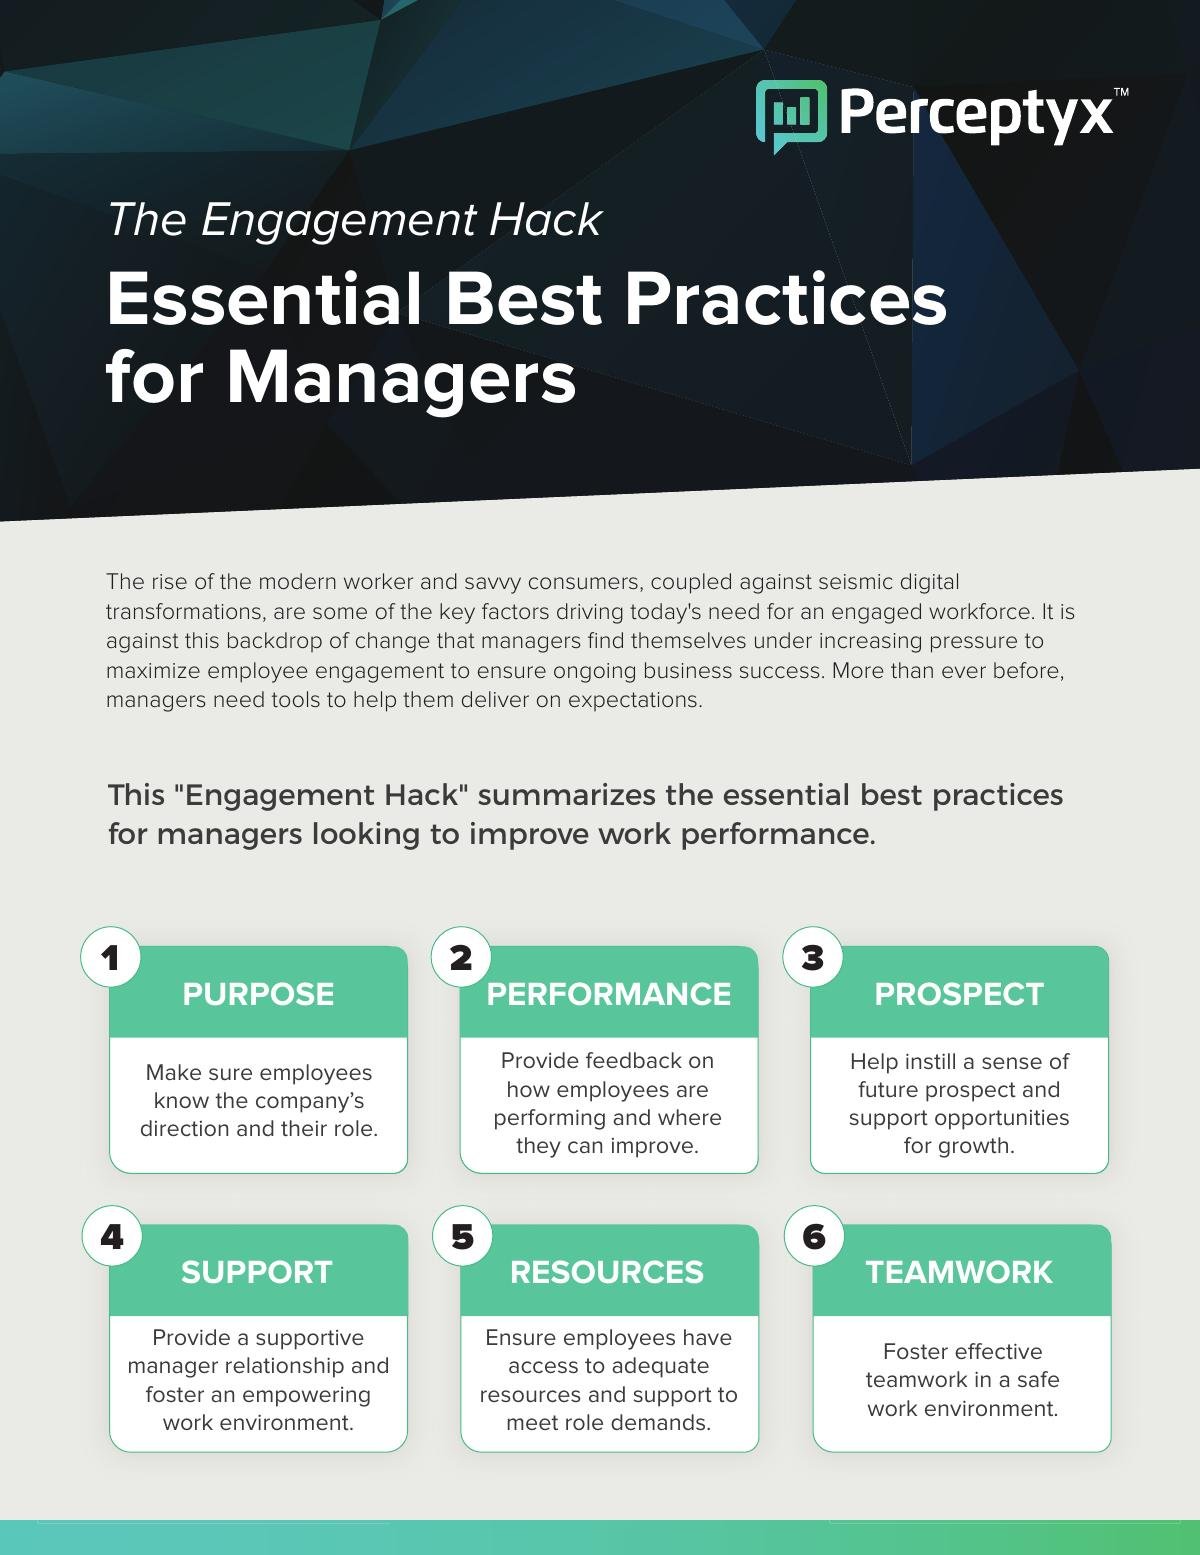 The Engagement Hack - Essential Best Practices for Managers